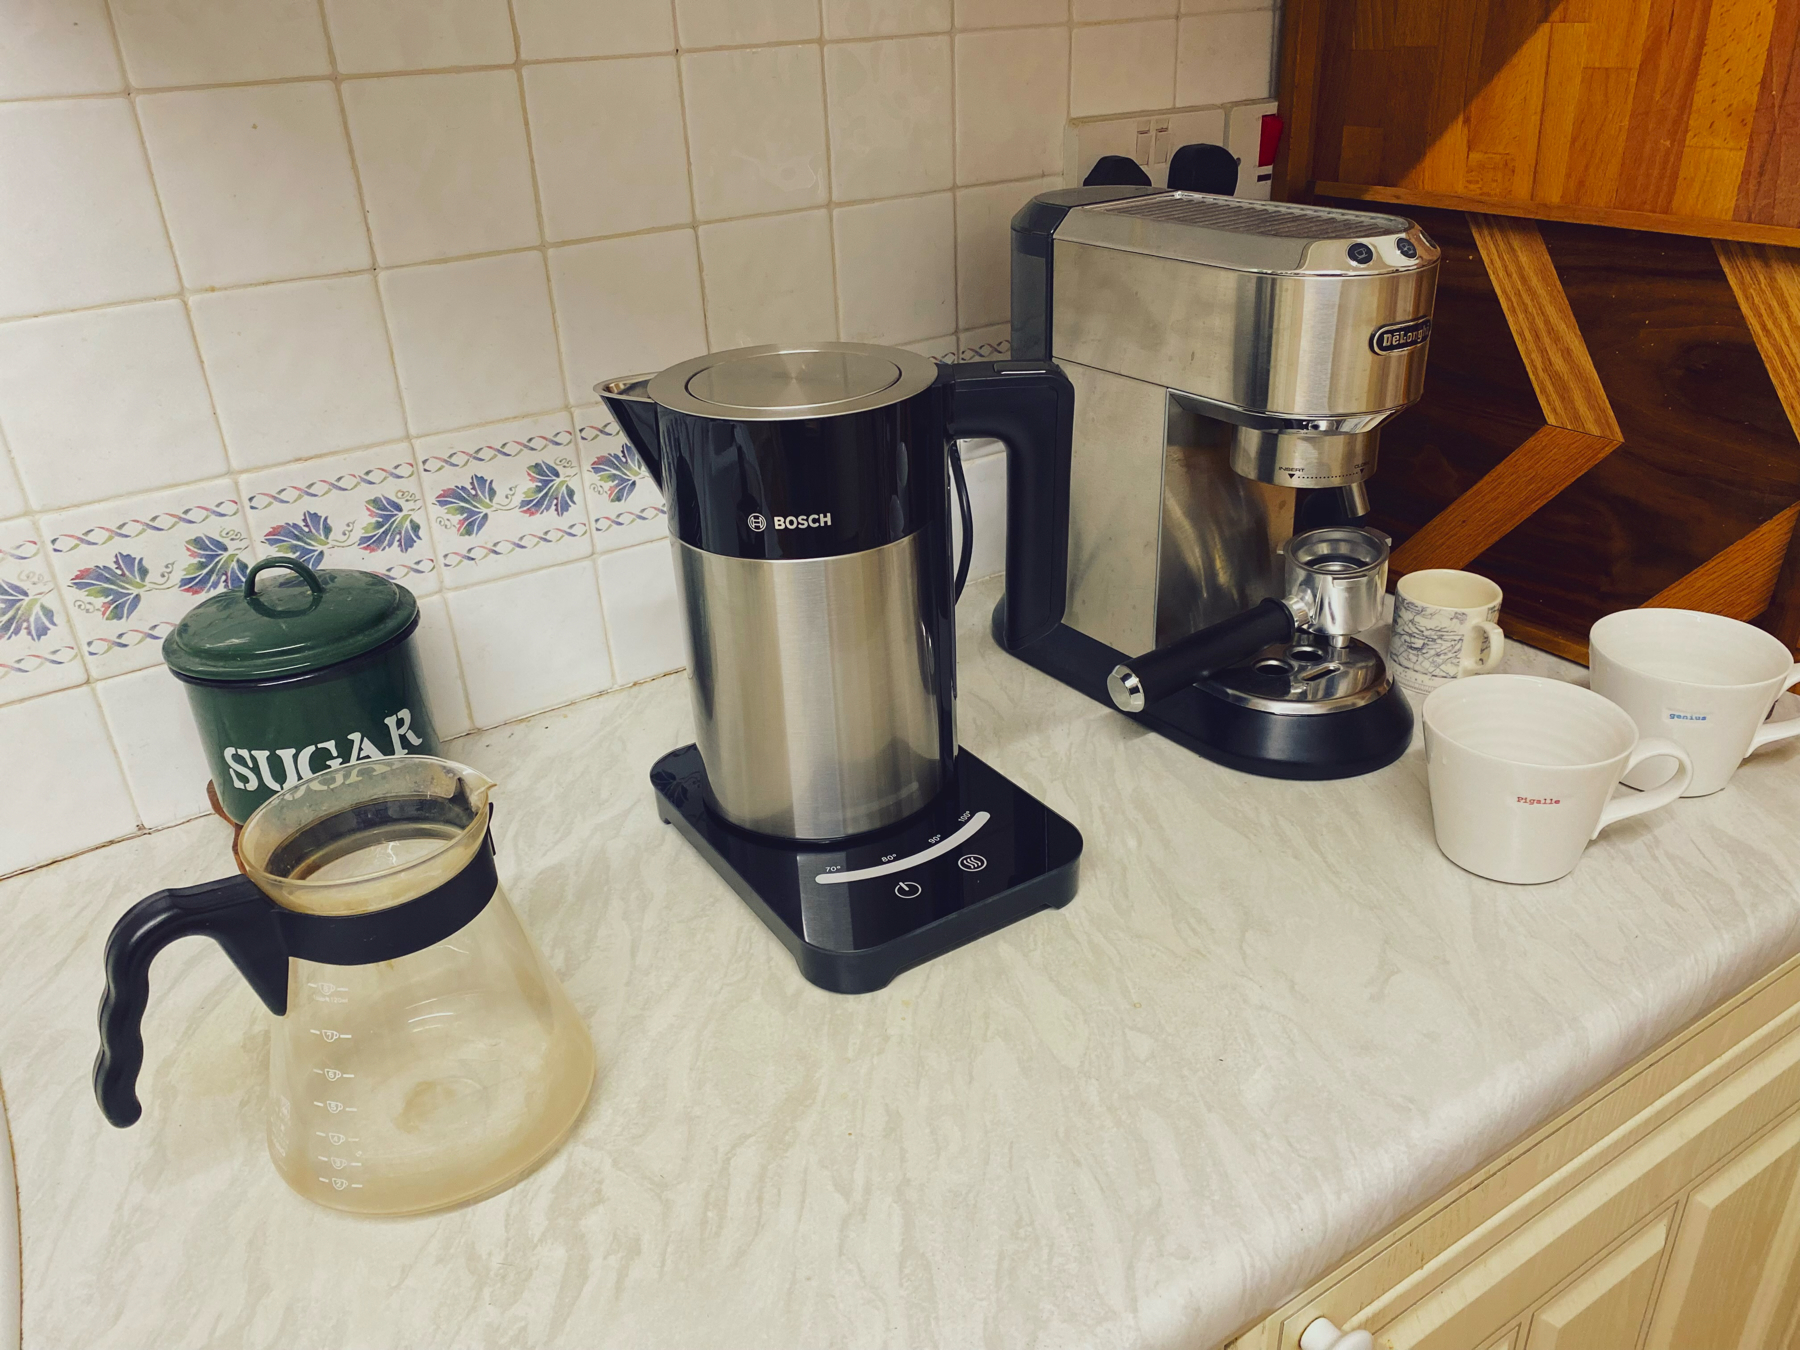 A kitchen countertop with a coffee-making setup including a kettle, an espresso machine, several mugs, and a sugar container.